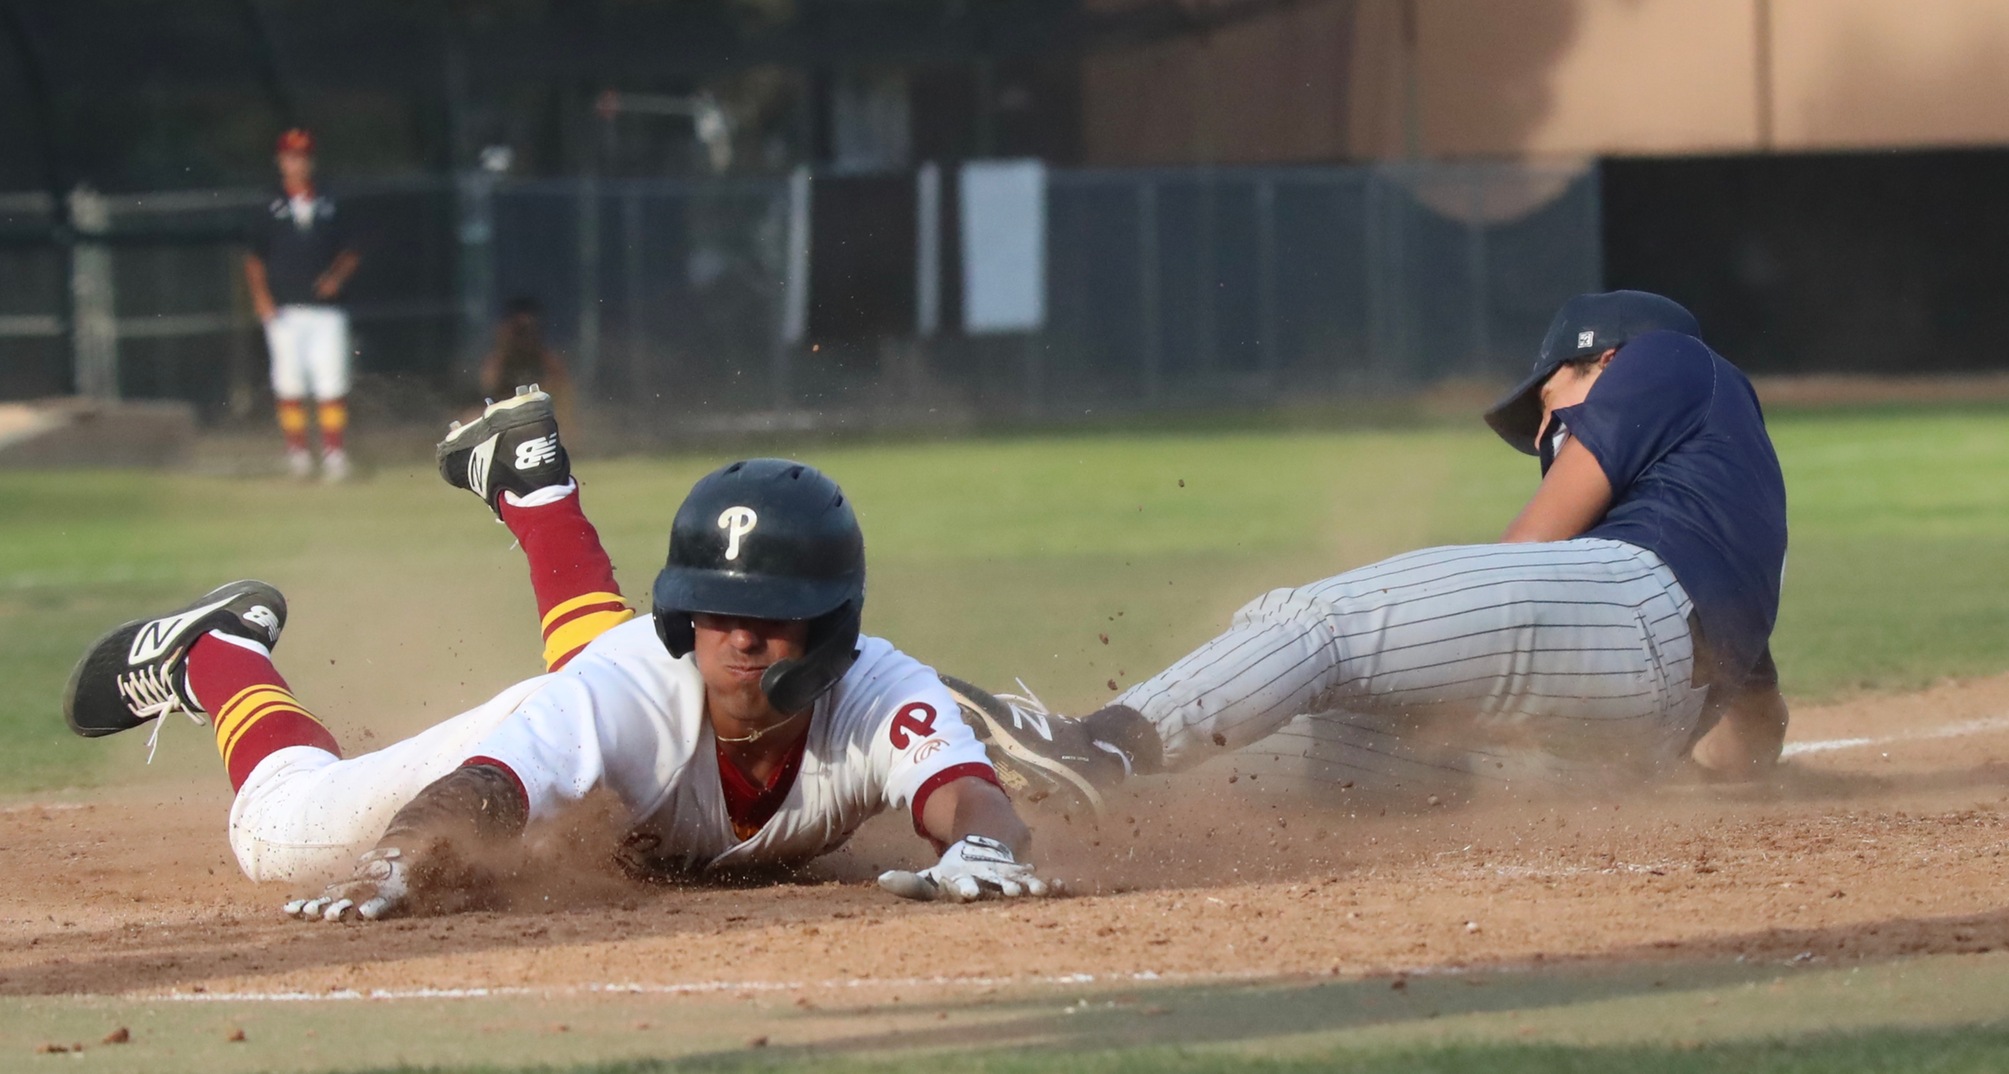 Lancer Aryonis Harrison beats the throw home during PCC's win on Thursday, photo by Michael Watkins.